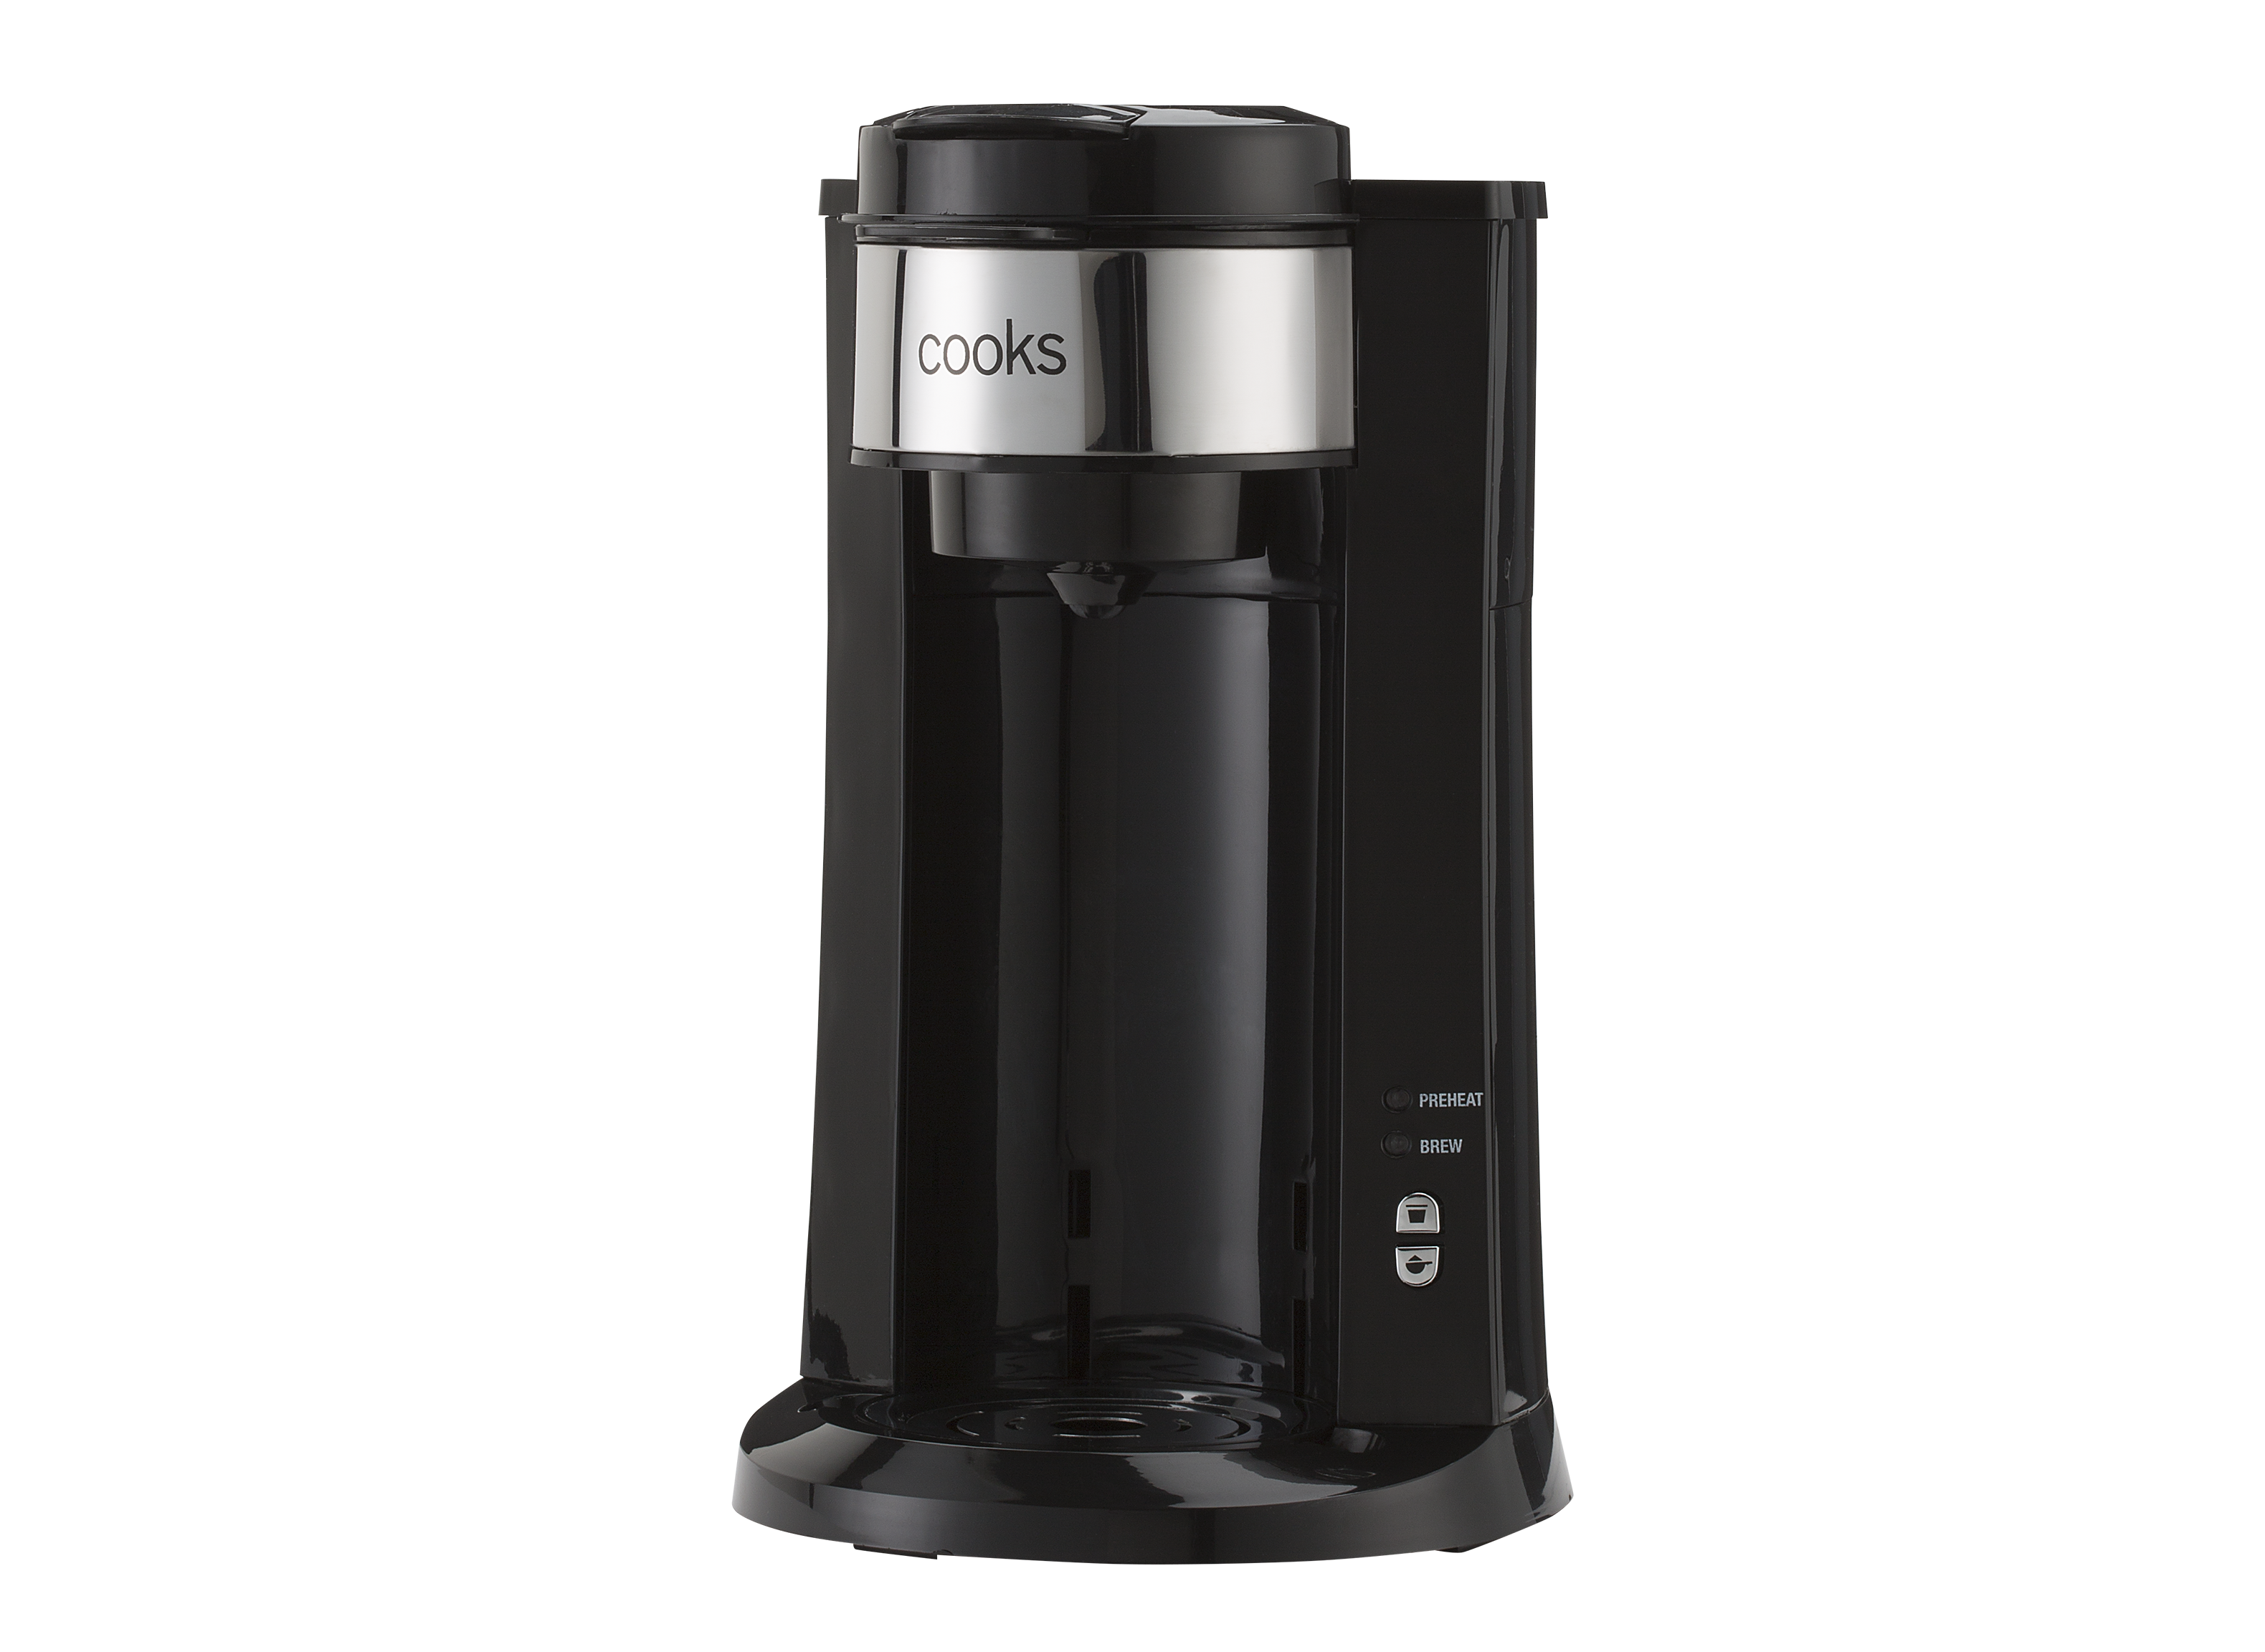 https://crdms.images.consumerreports.org/prod/products/cr/models/384085-coffeemakers-cooks-singleservejcpenney.png